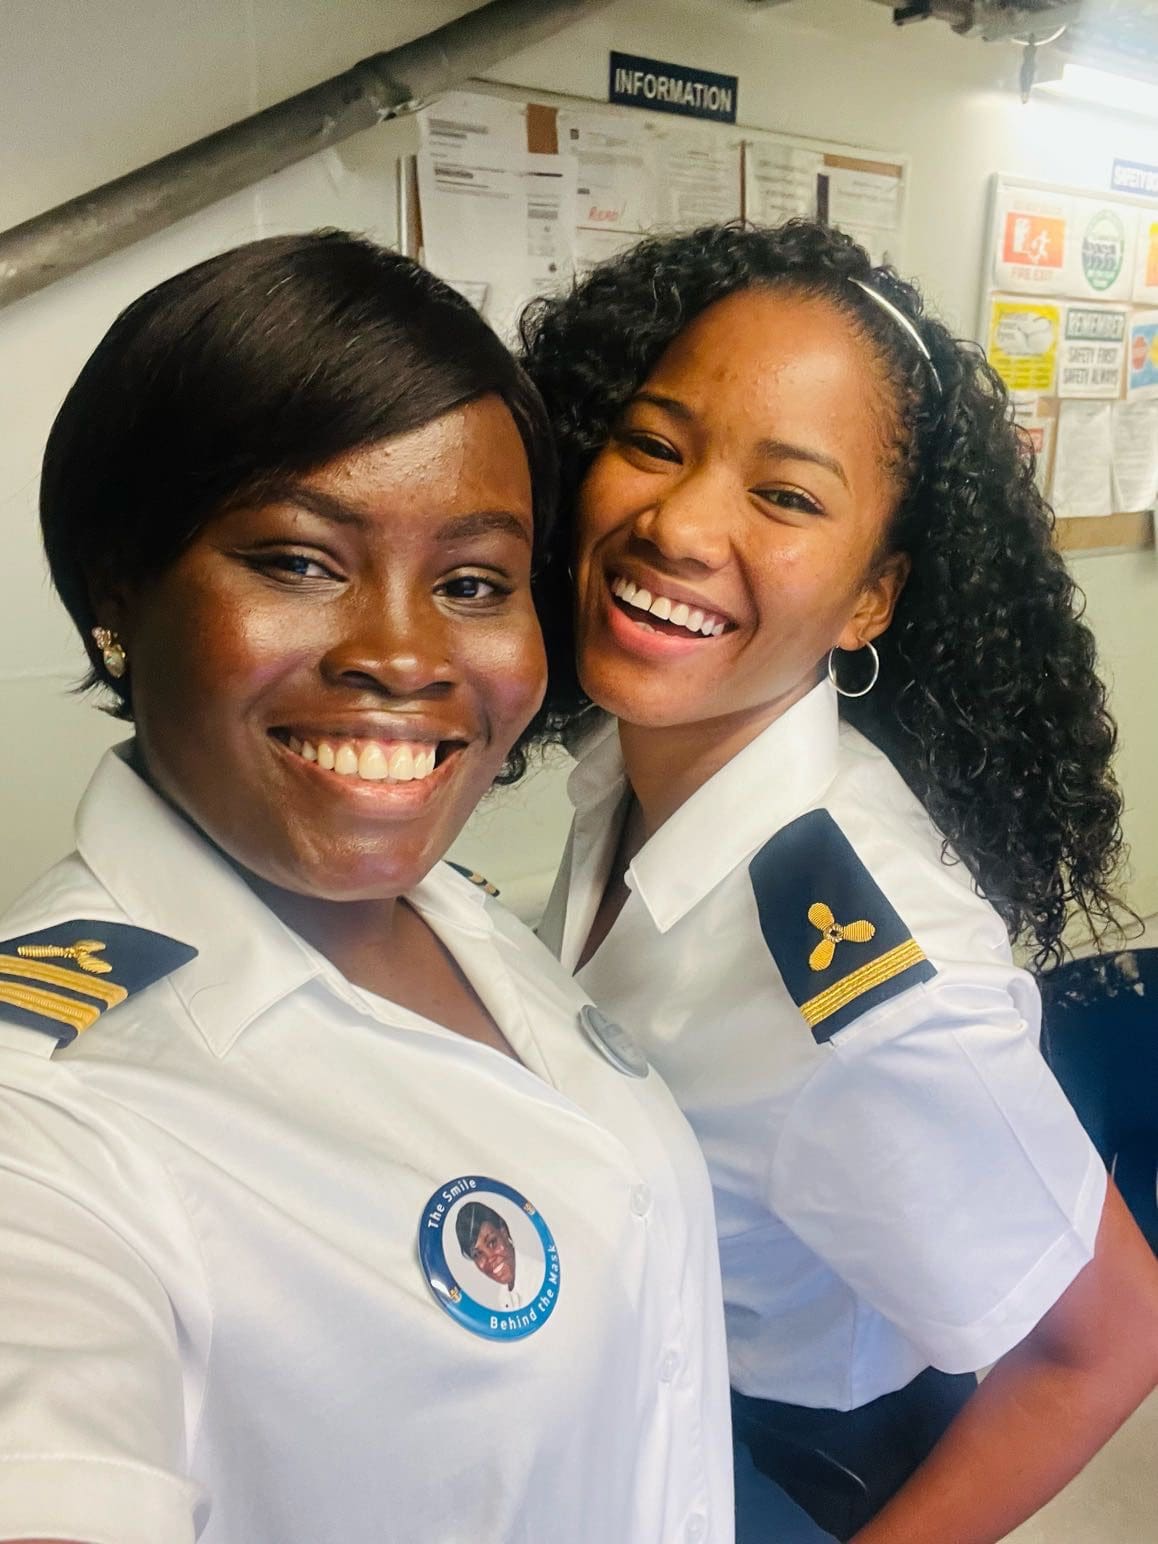 Monica Nancy Candny, Engine Cadet, Royal Caribbean International in uniform with colleague